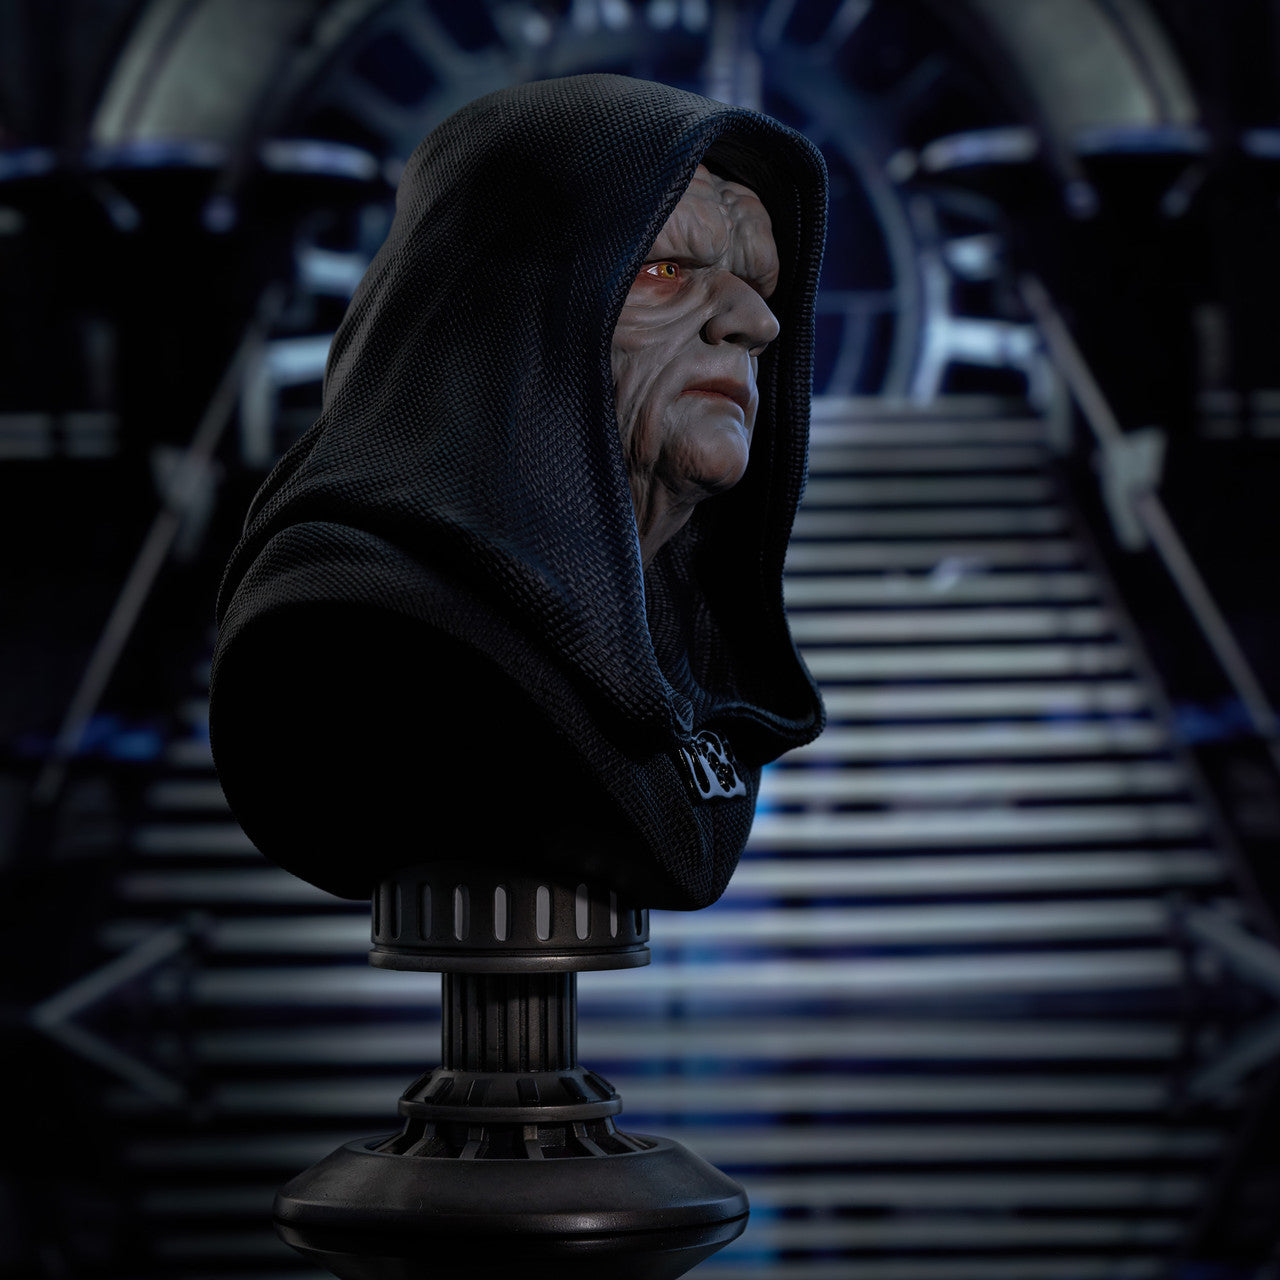 Star Wars: Return of the Jedi Emperor Palpatine Legends in 3D 1:2 Scale Bust by Diamond Gallery -Diamond Gallery - India - www.superherotoystore.com